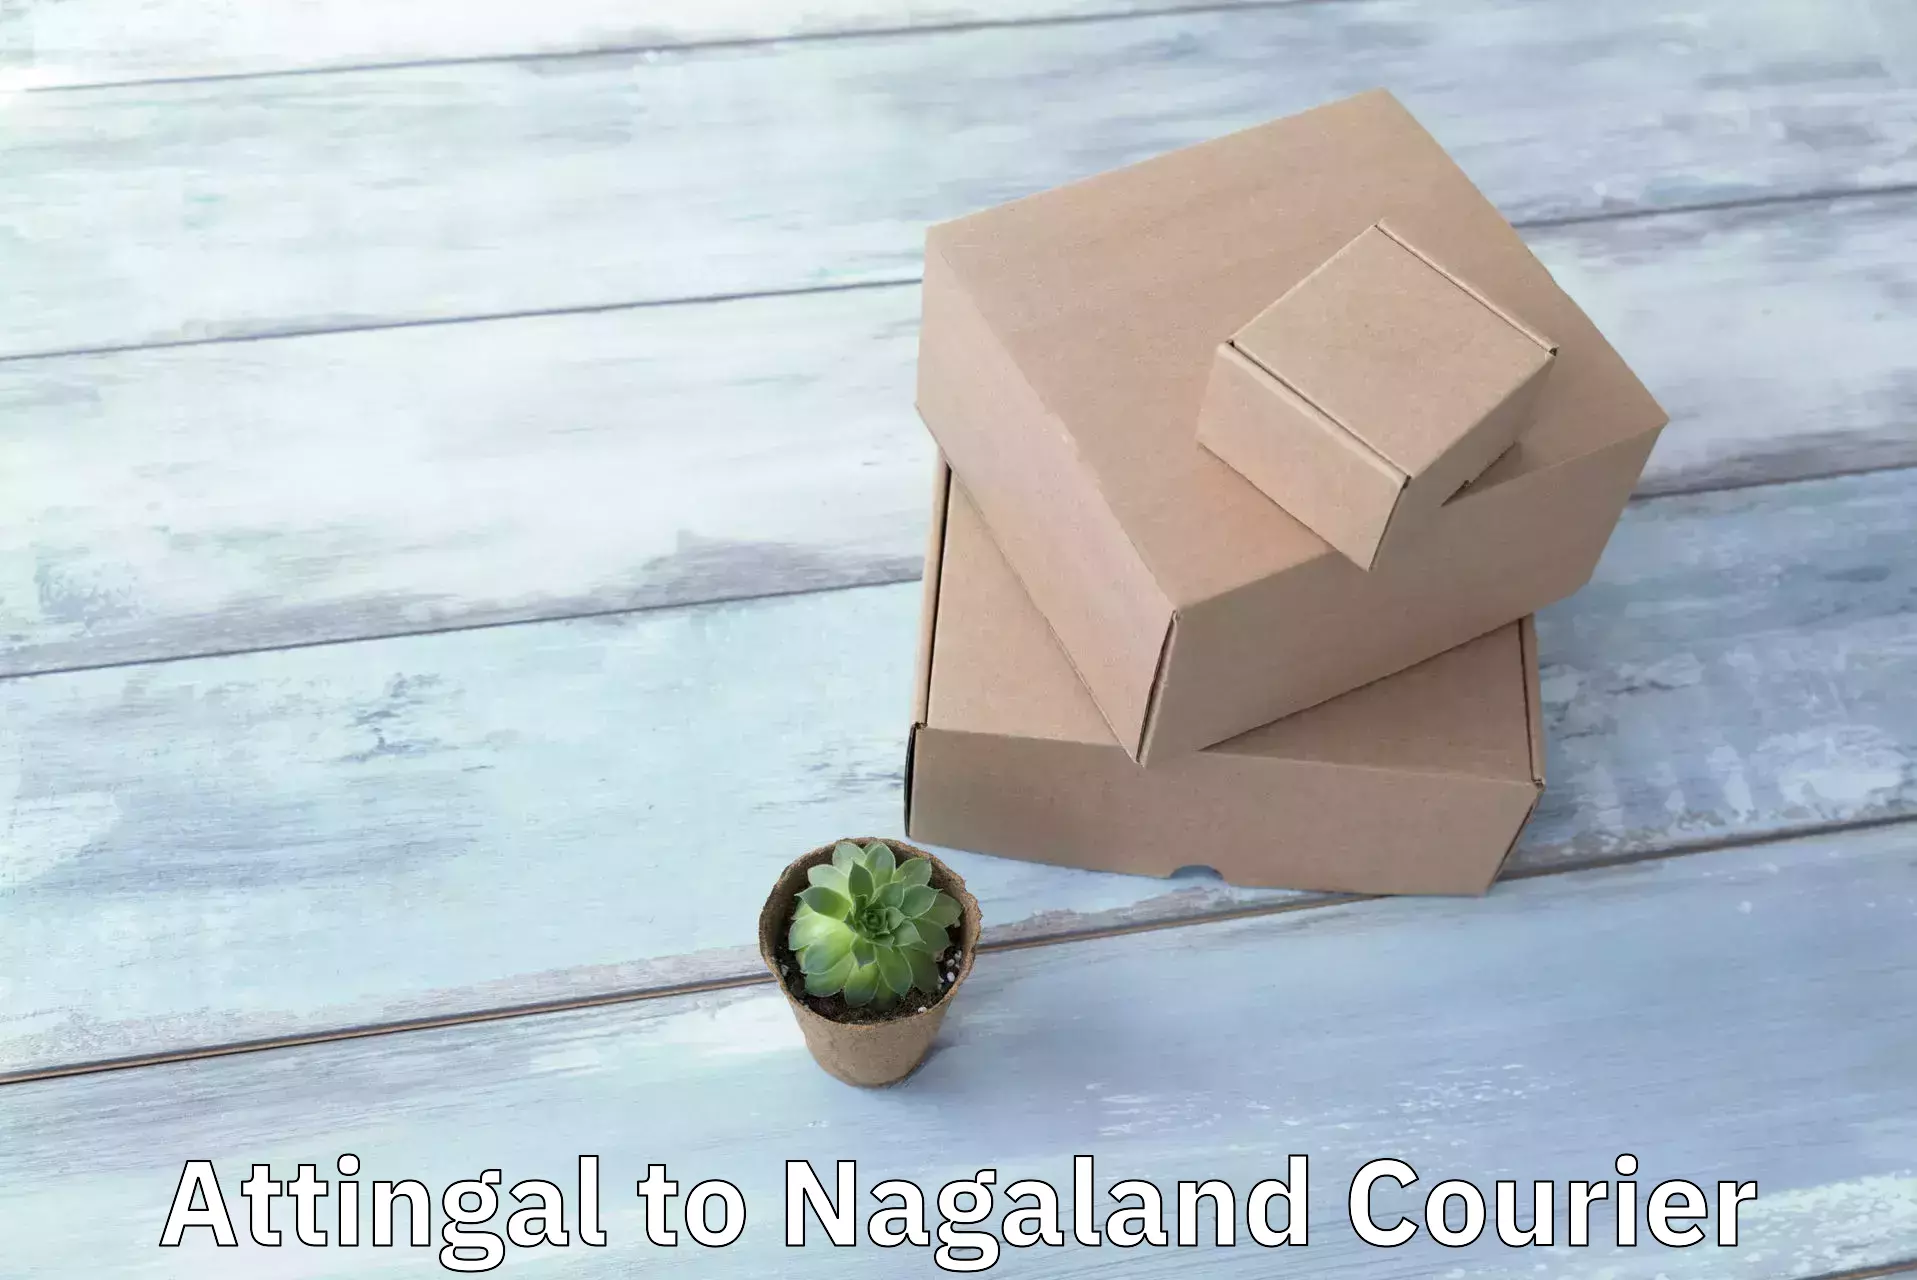 Efficient package consolidation Attingal to Nagaland